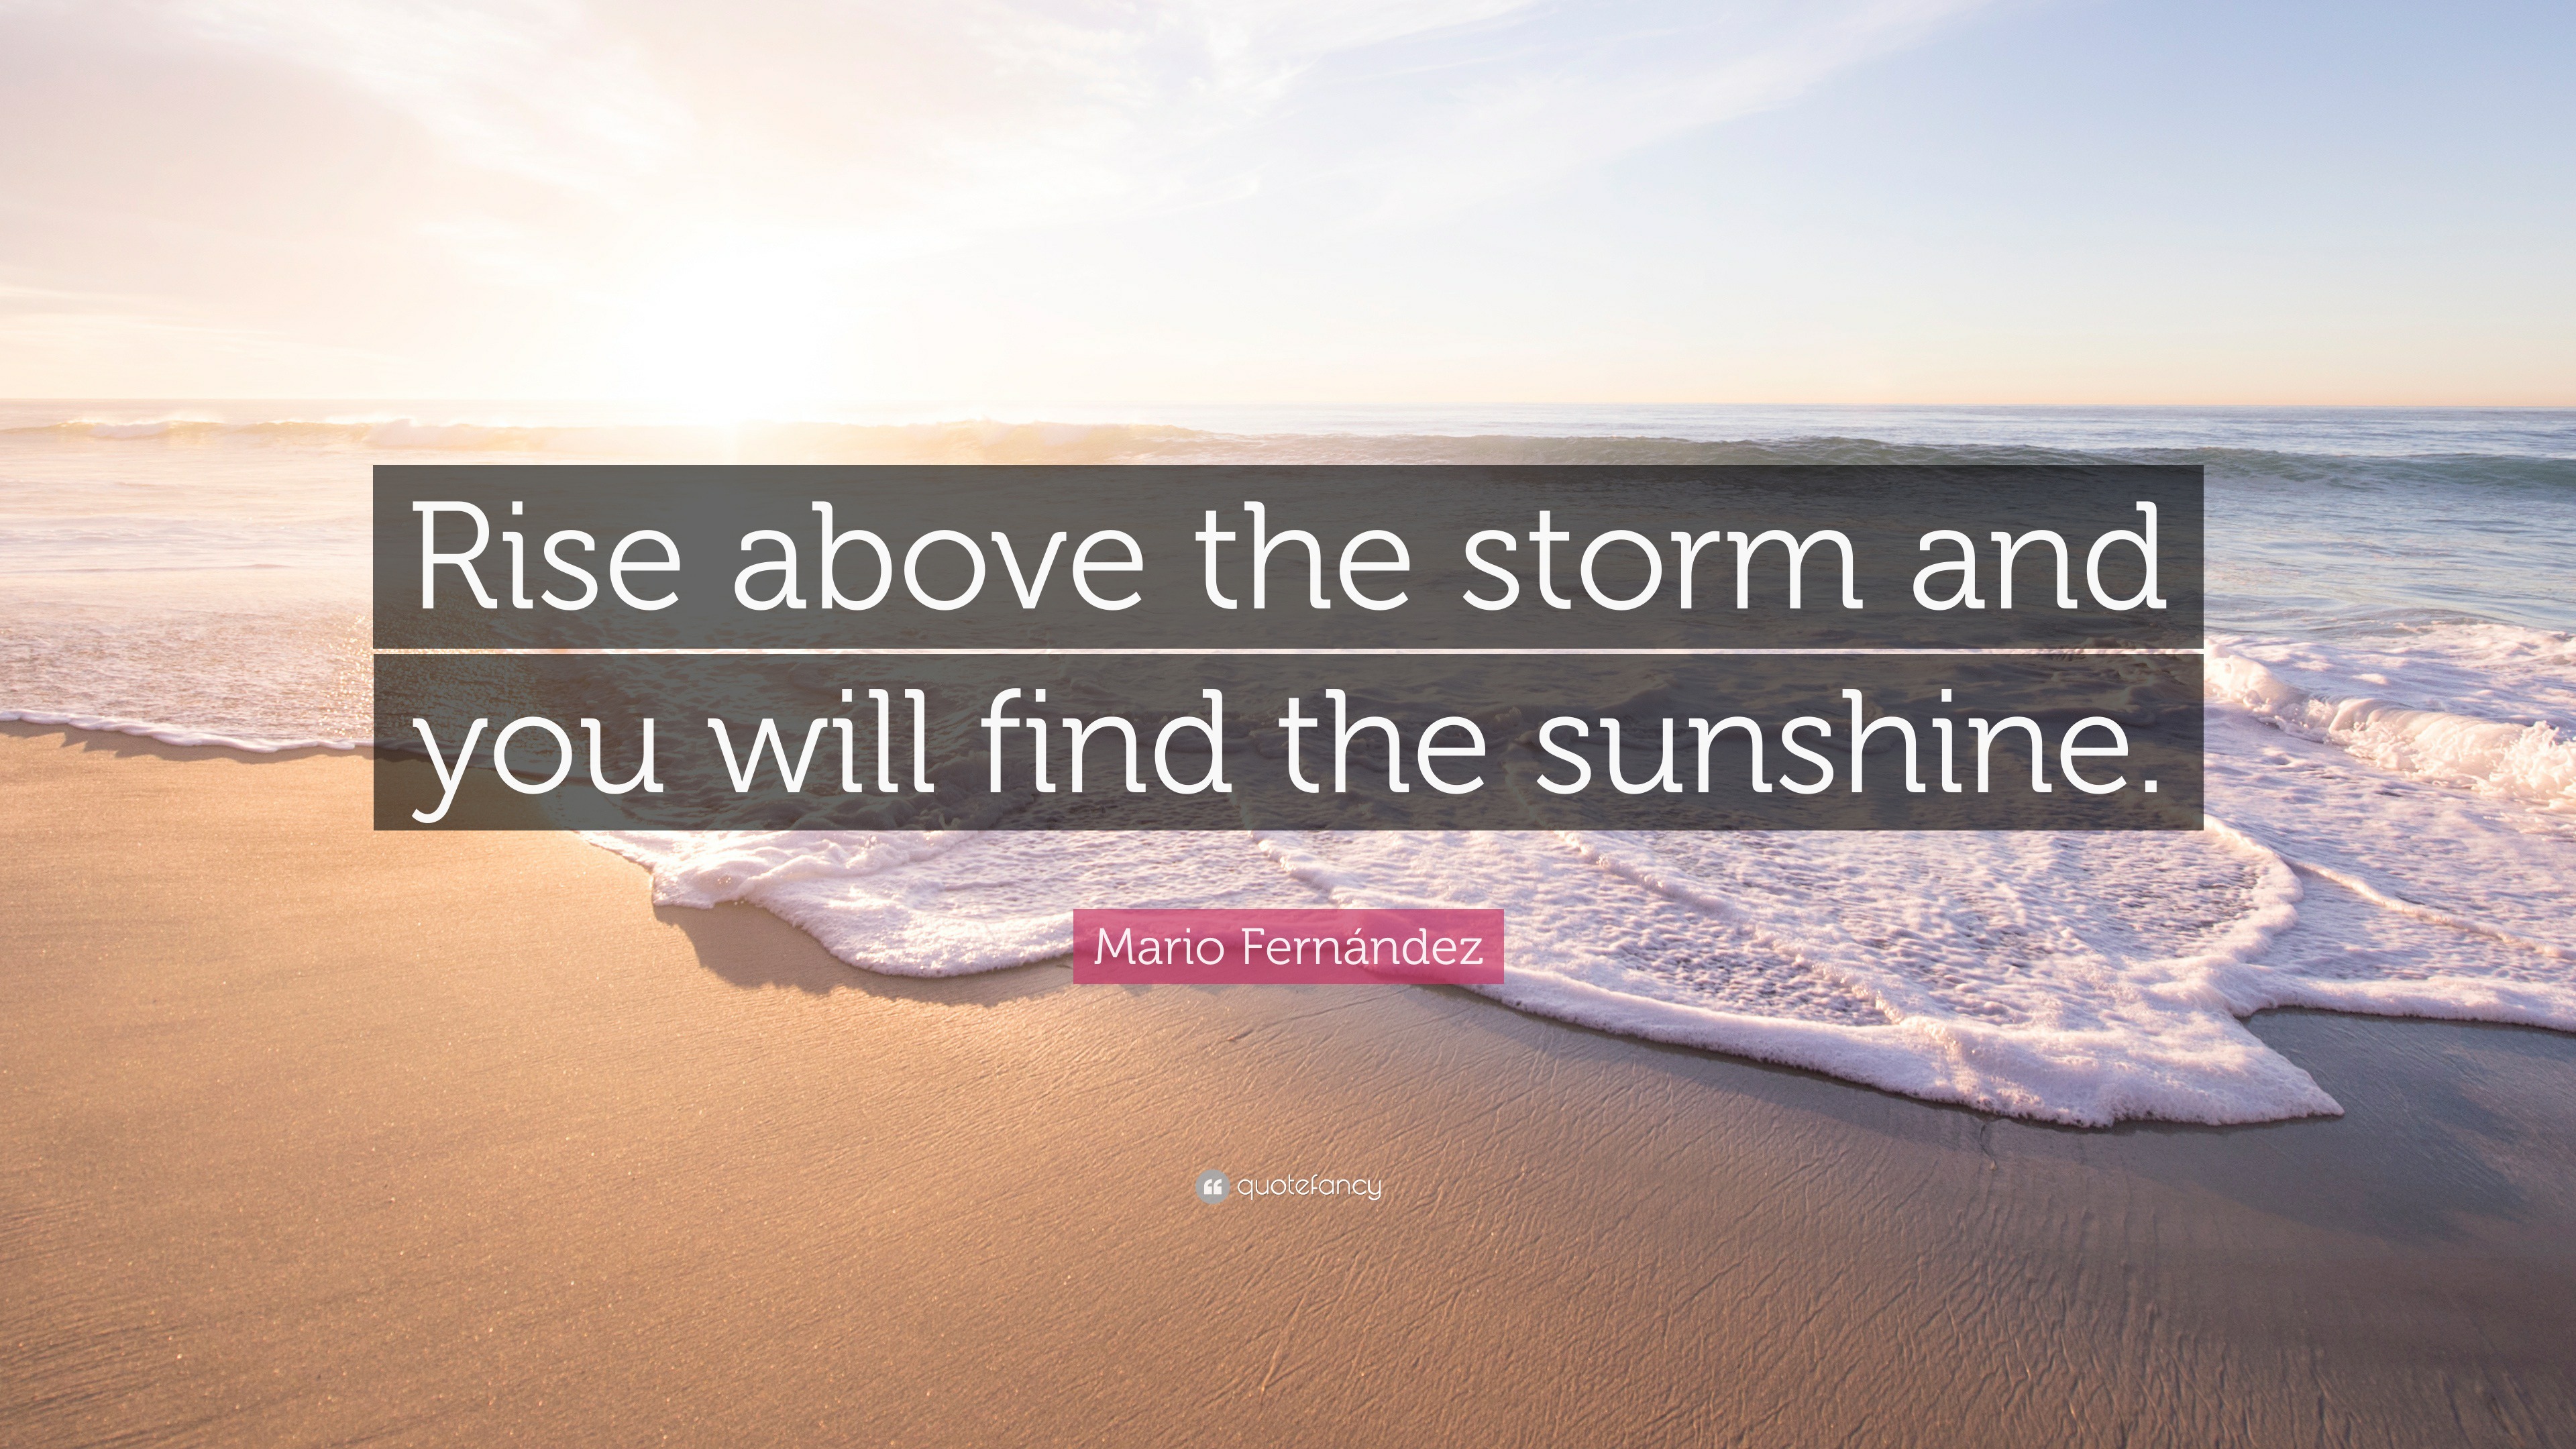 Mario Fernández Quote: “Rise above the storm and you will find the